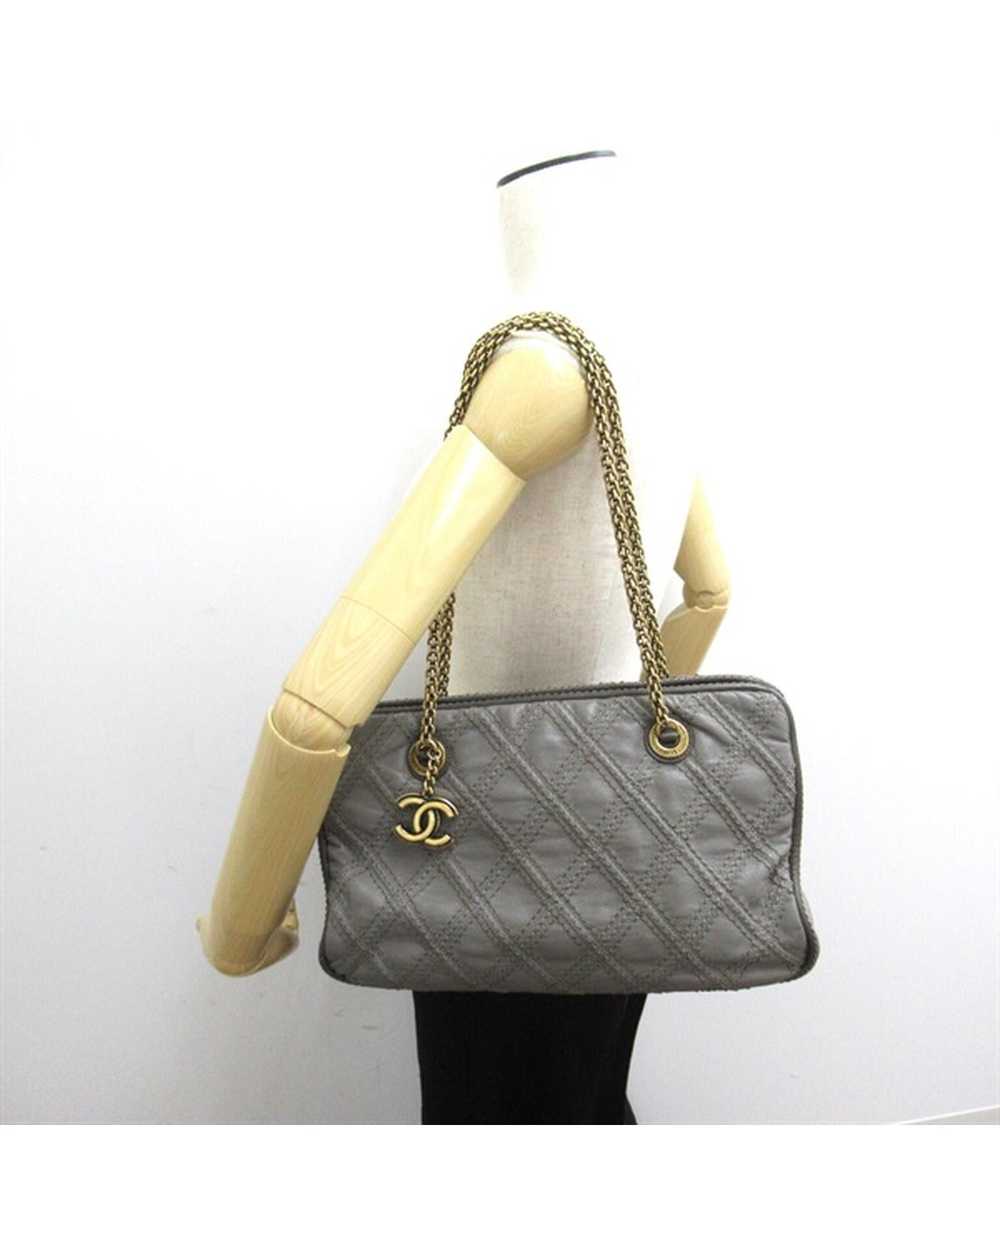 Chanel Quilted Leather Triptych Tote Bag - Grey - image 6